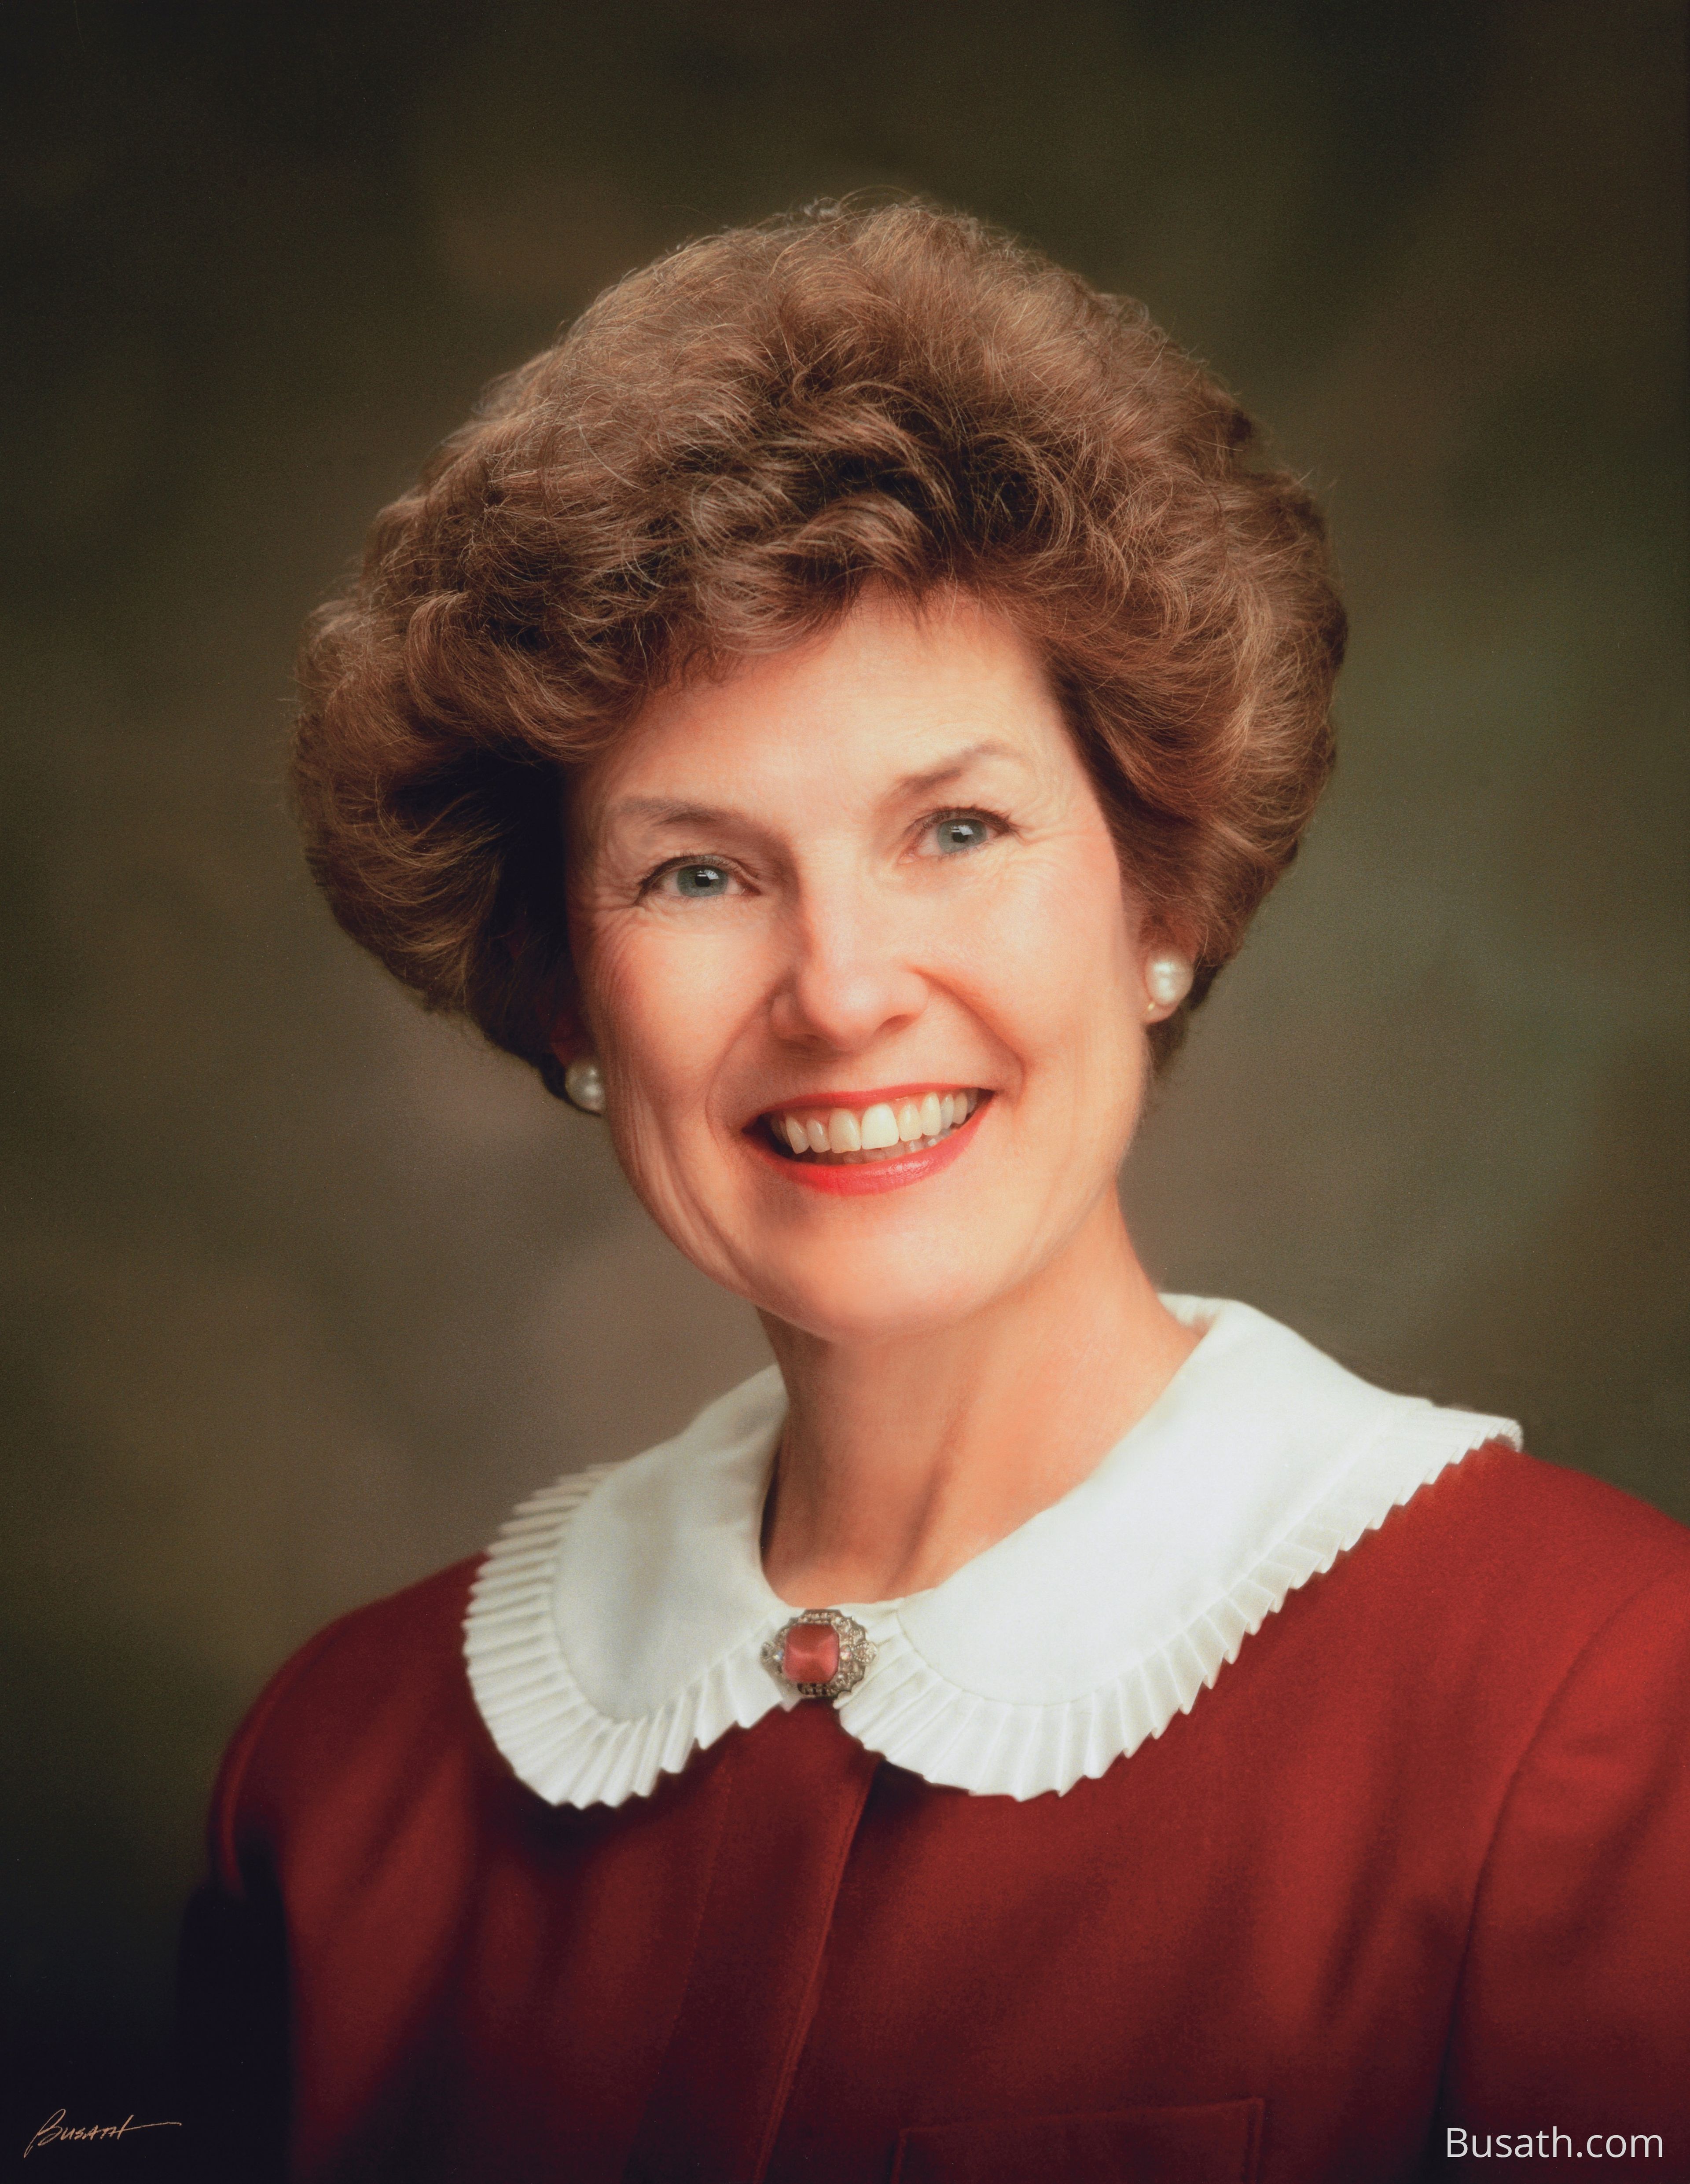 A portrait of Barbara Woodhead Winder, who served as the 11th general president of the Relief Society from 1984 to 1990.